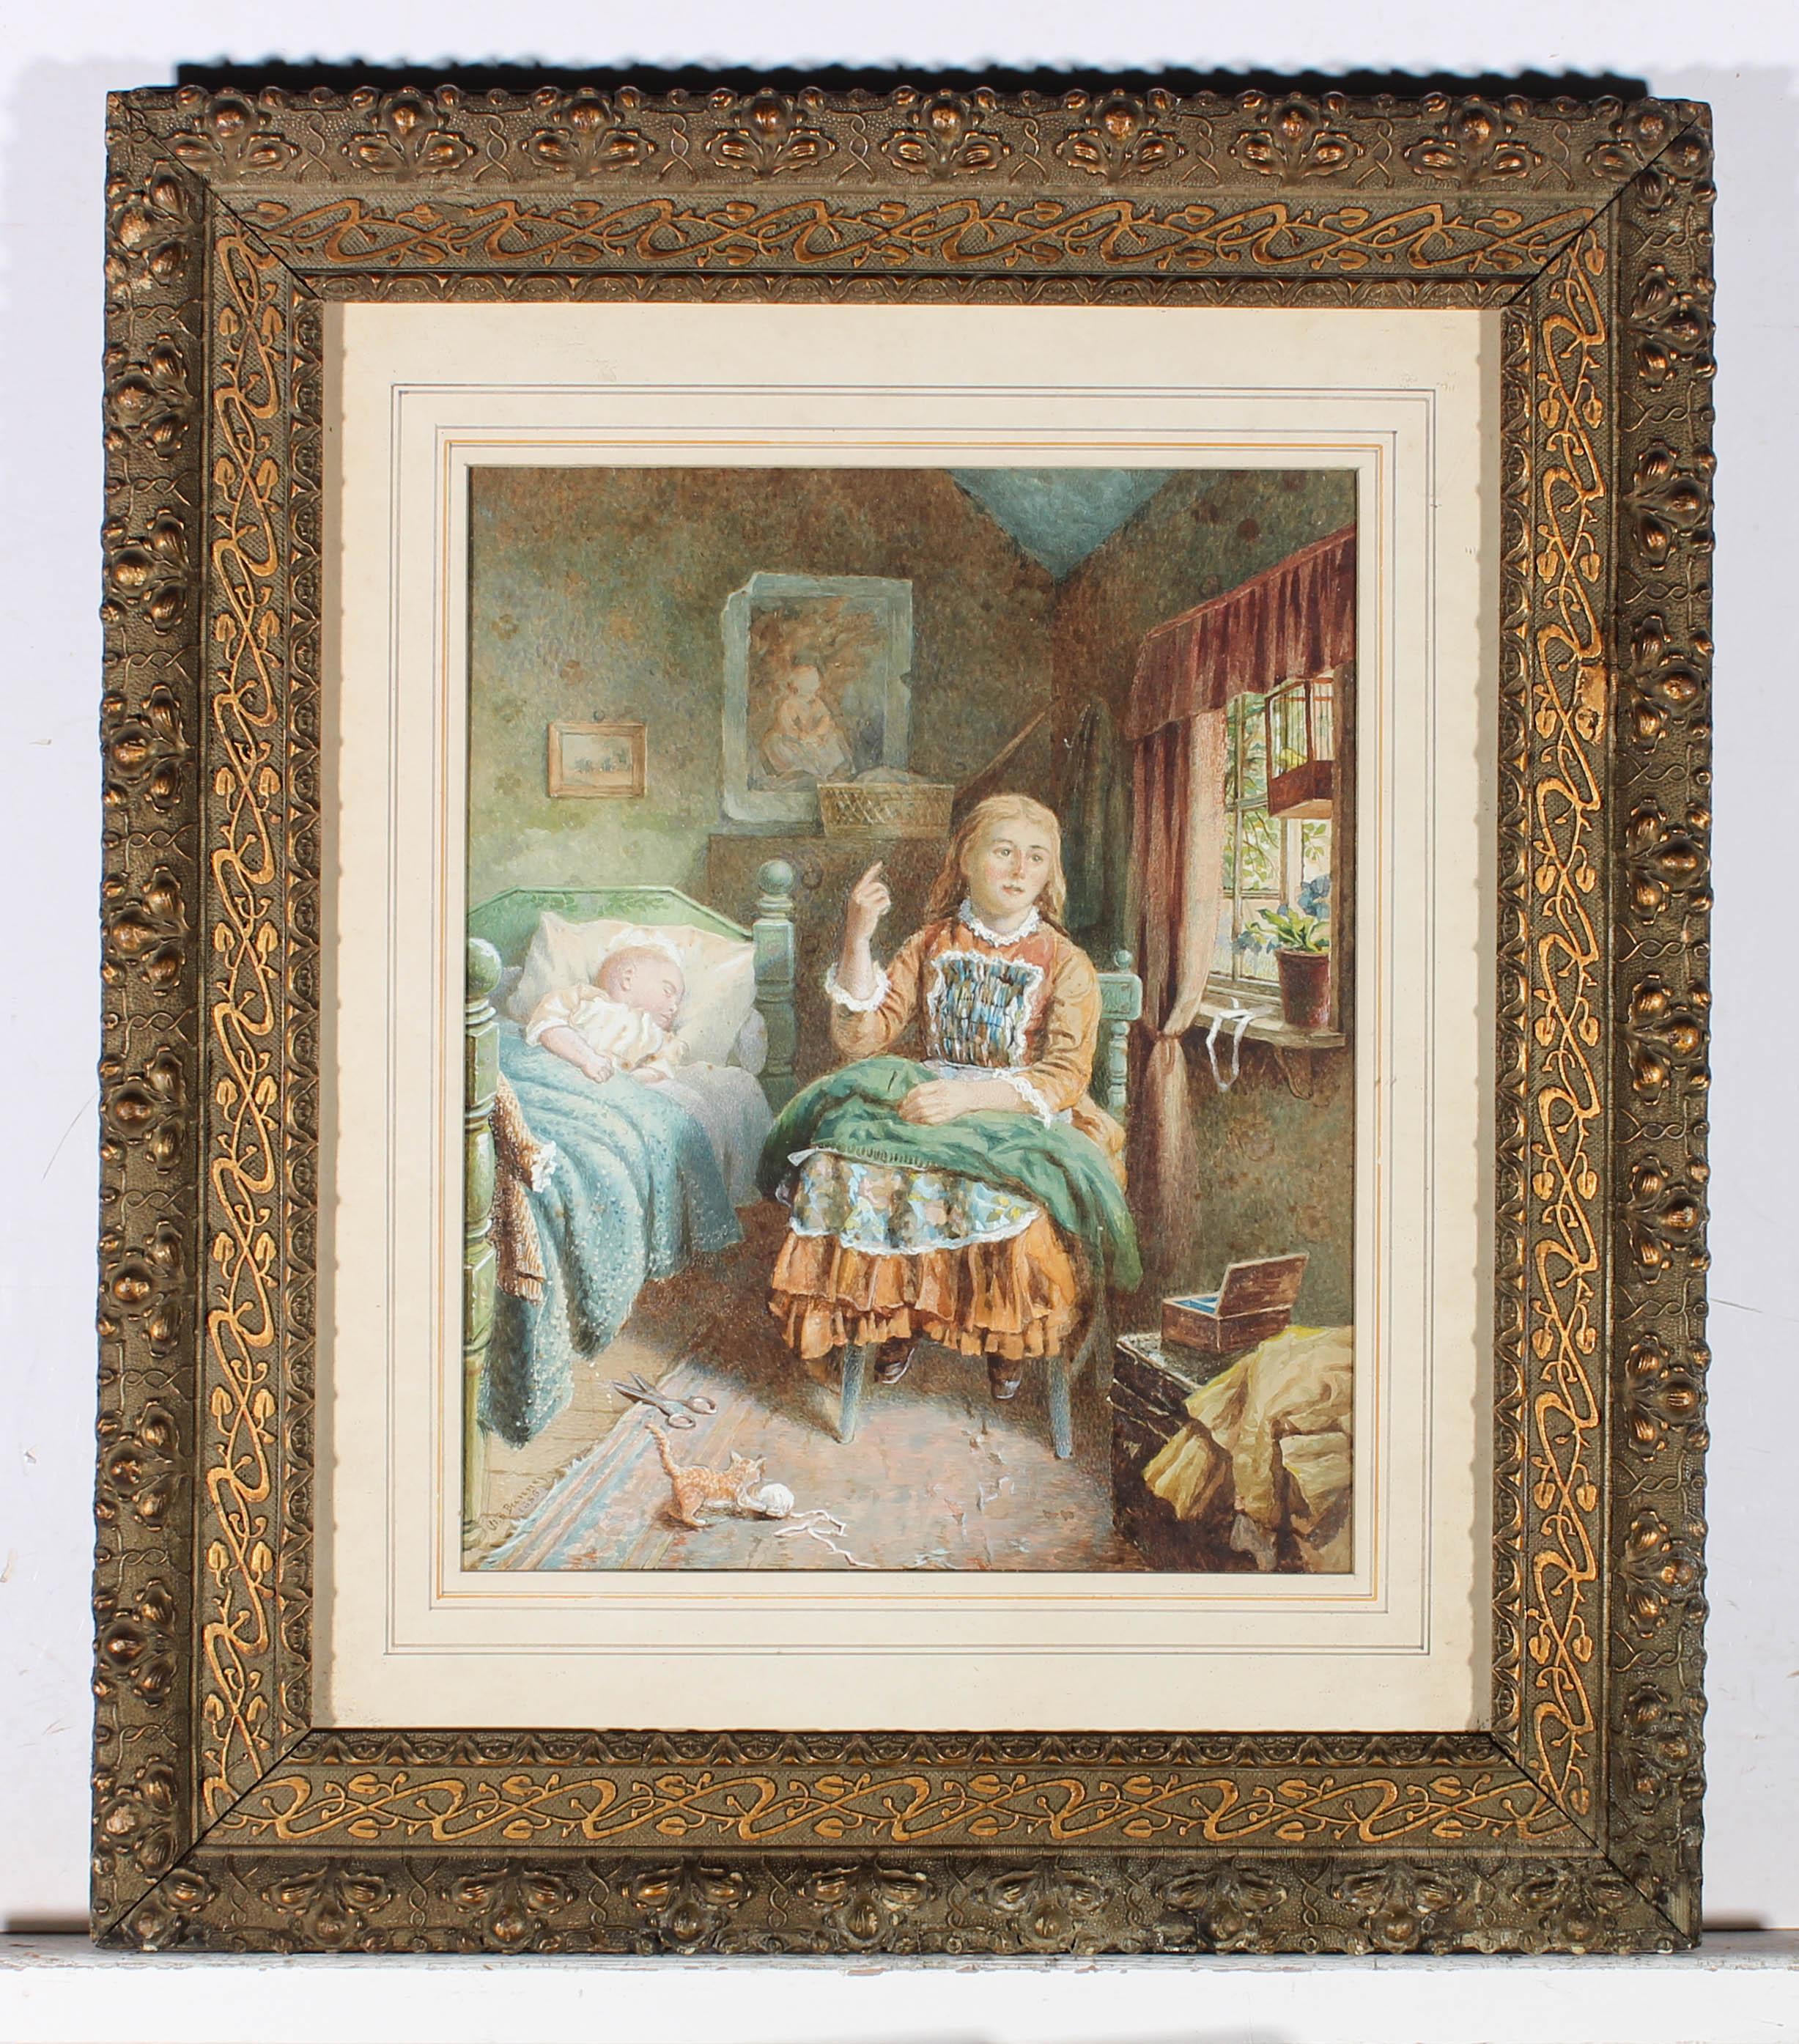 A charming Victorian watercolor interior scene showing a young girl sitting in a wooden chair with a green blanket on her lap while a baby sleeps in a bed at her side. The sun shines through an open window and a kitten plays with a ball of string on